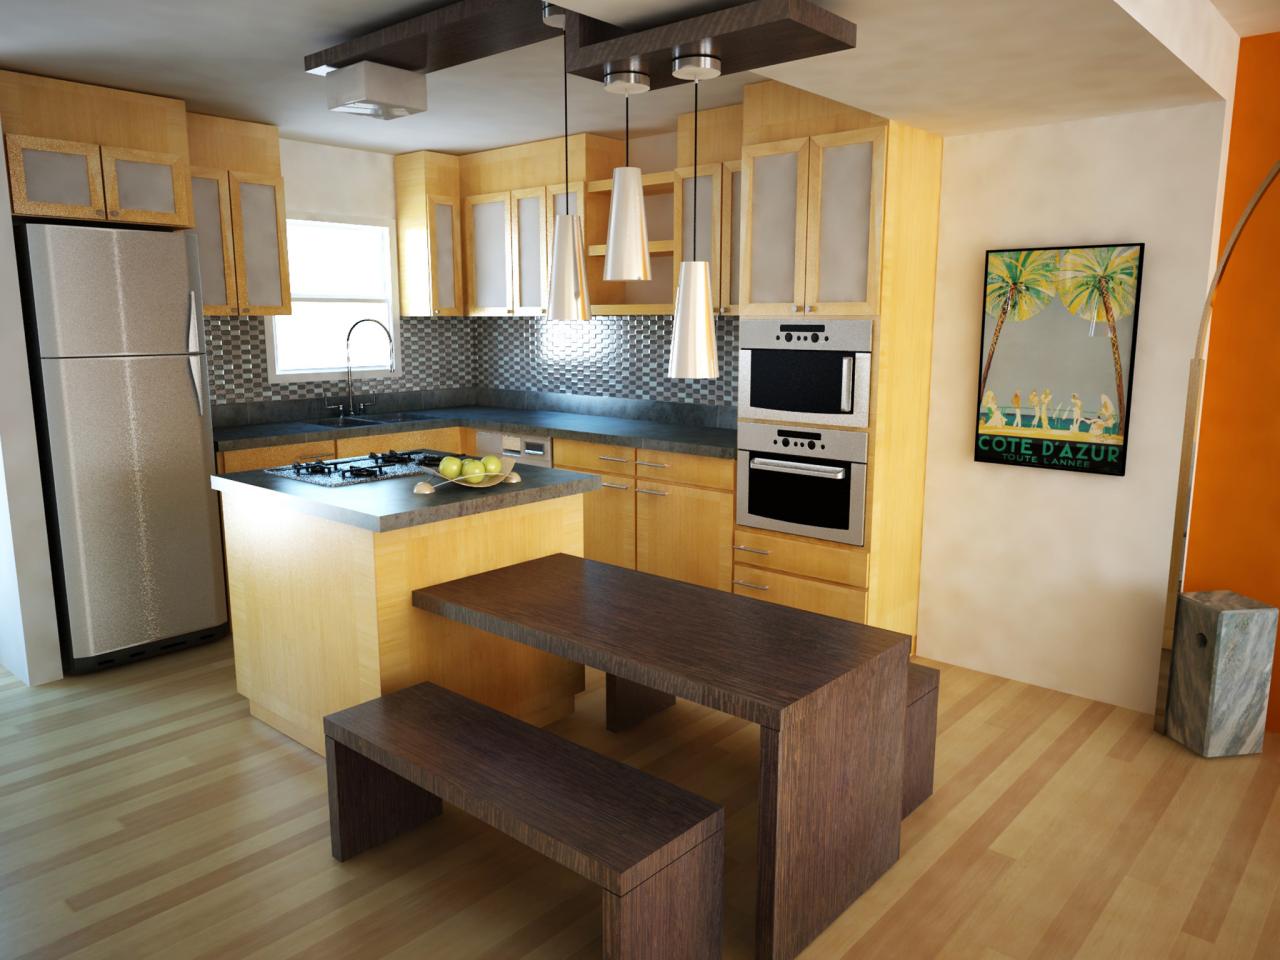 Small Kitchen Layouts Pictures Ideas Tips From Hgtv Hgtv in Small Kitchen Layout Designs